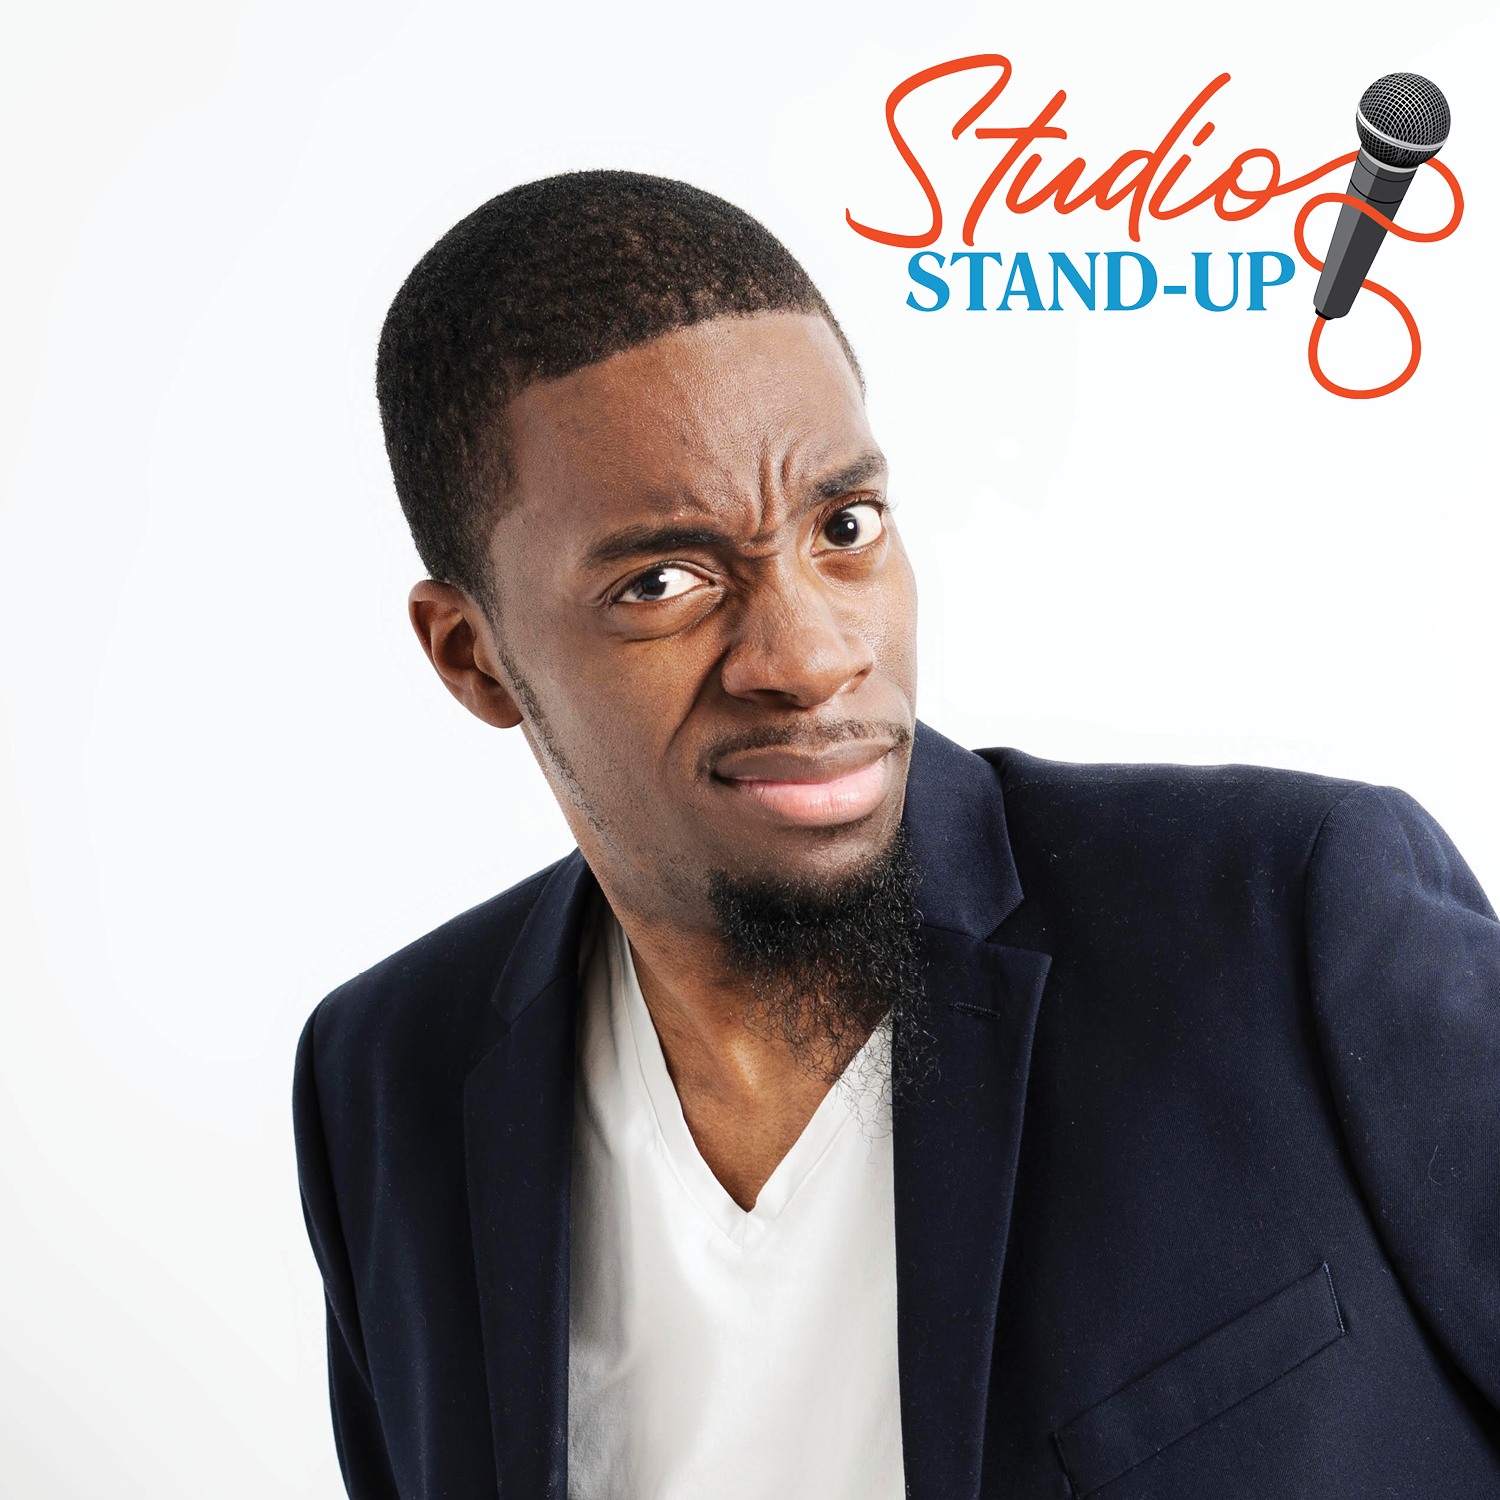 Image for Studio Stand-Up: Erik Terrell & Rachel Fogletto  Hosted by Josh Dweh